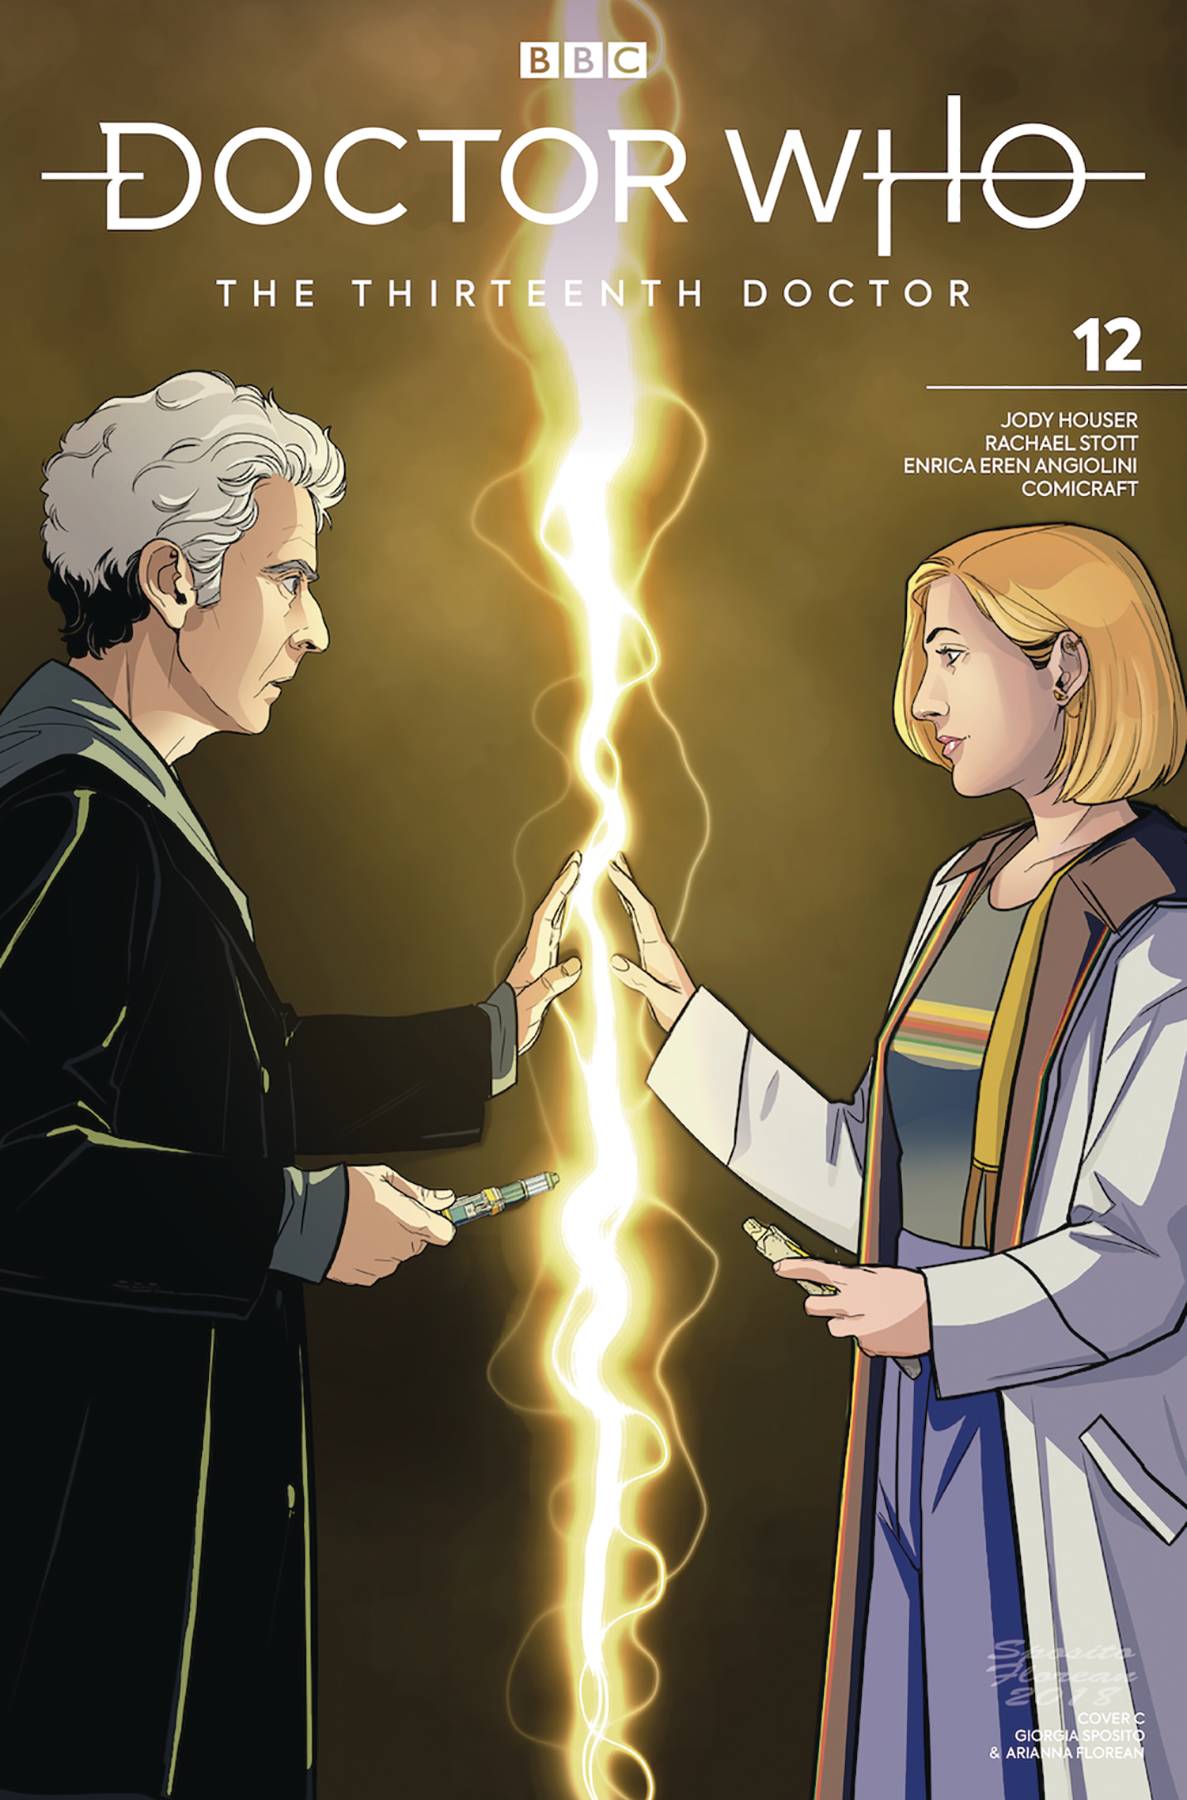 DOCTOR WHO 13TH #12 CVR C 12TH DOCTOR